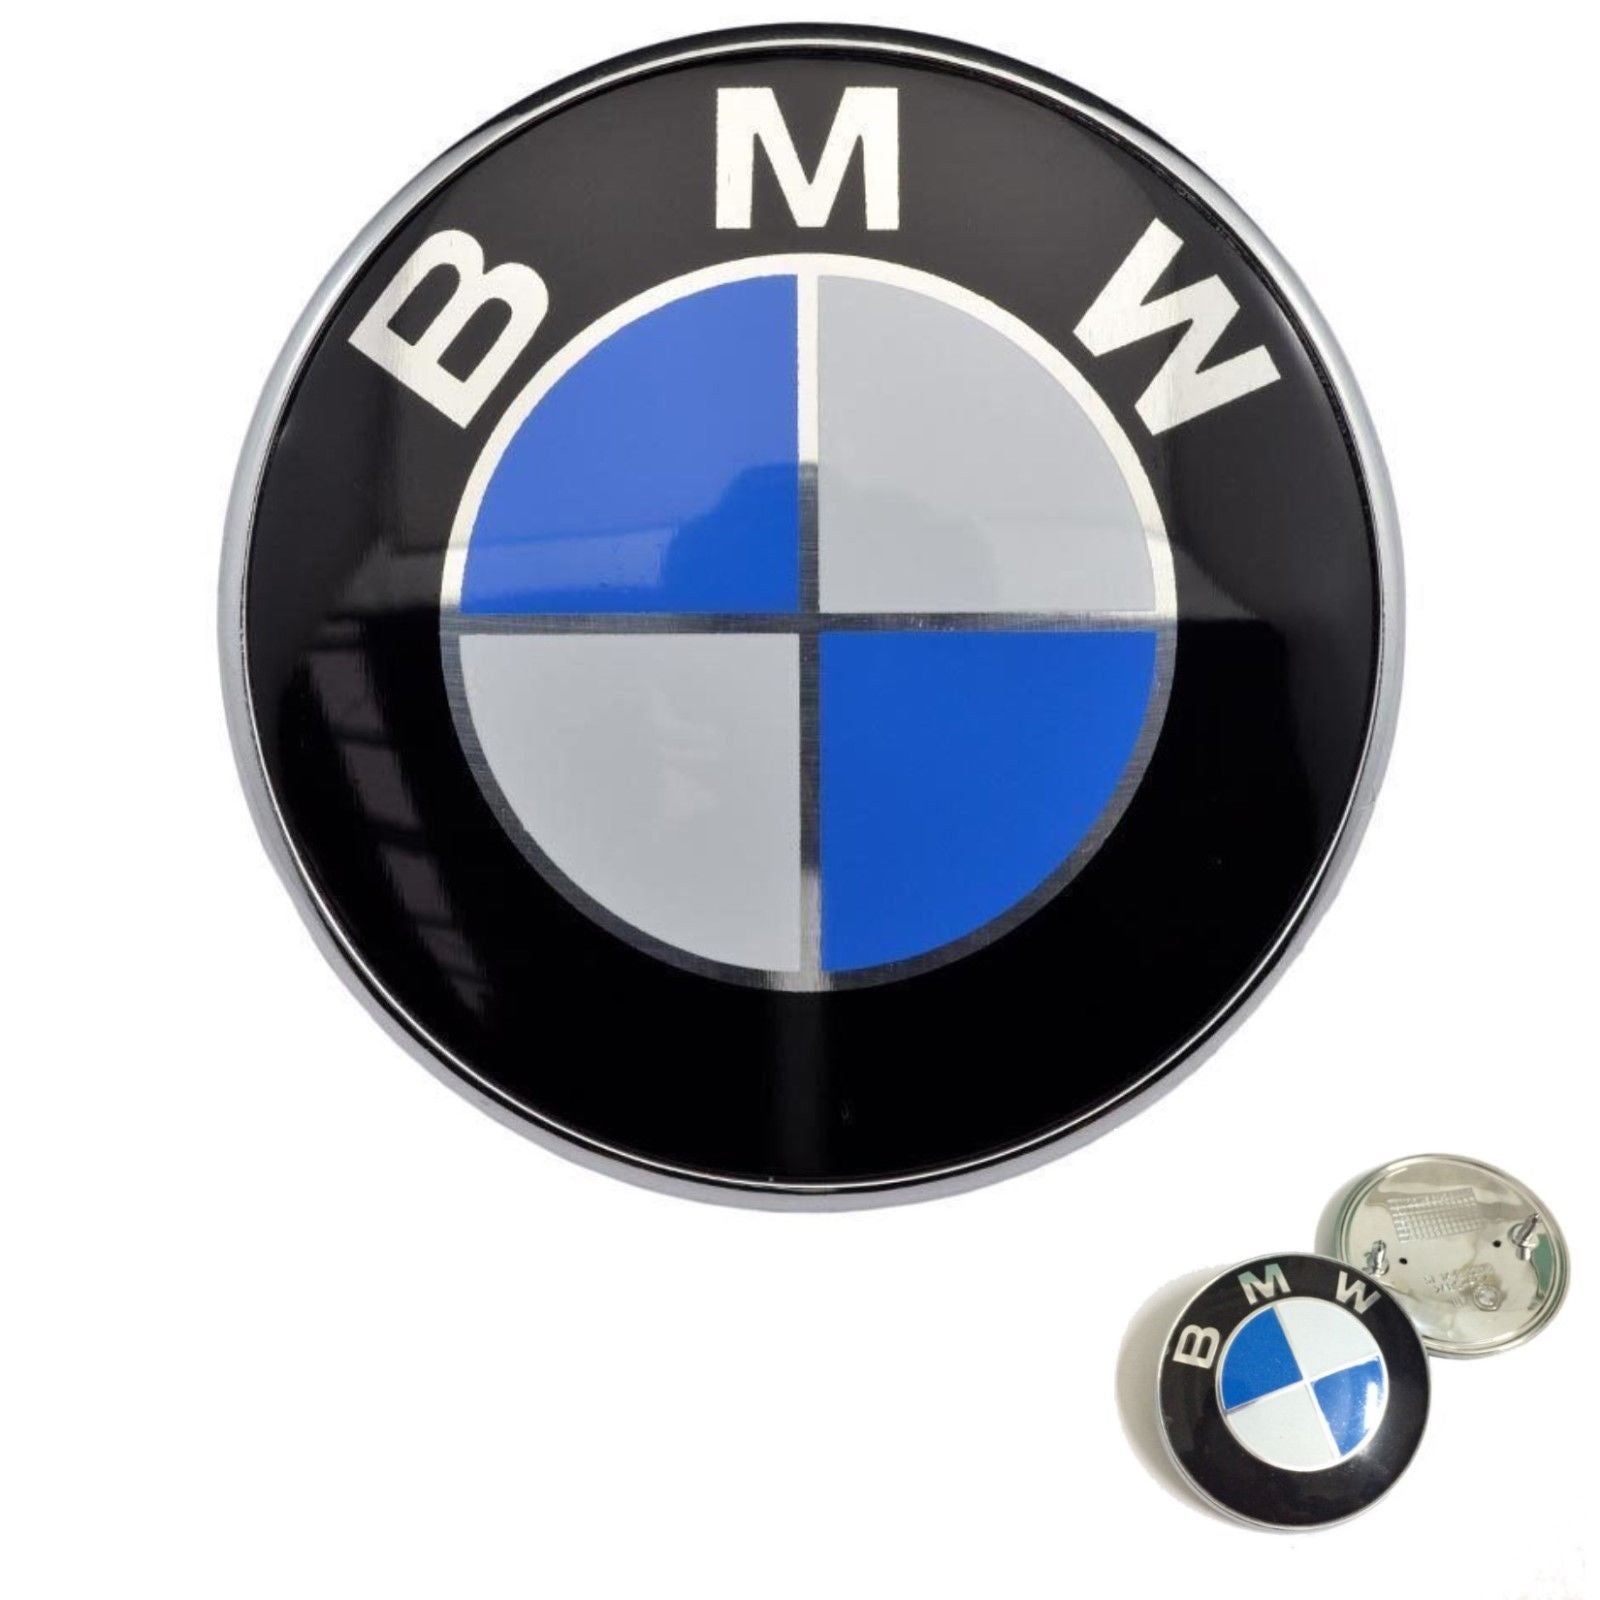 BMW Genuine Insignia Stamped with AD:369999